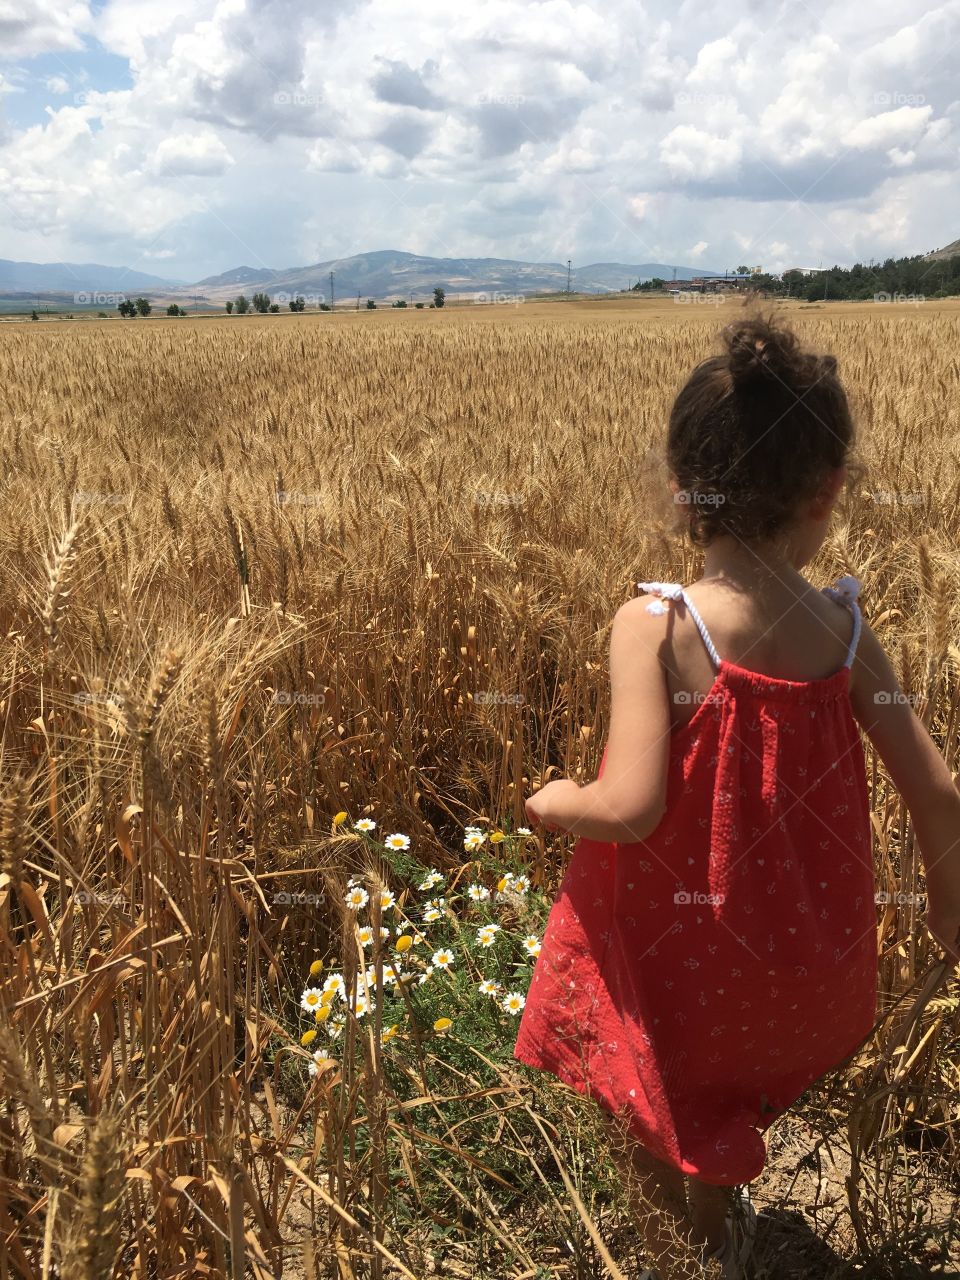 A wheat field and an angel